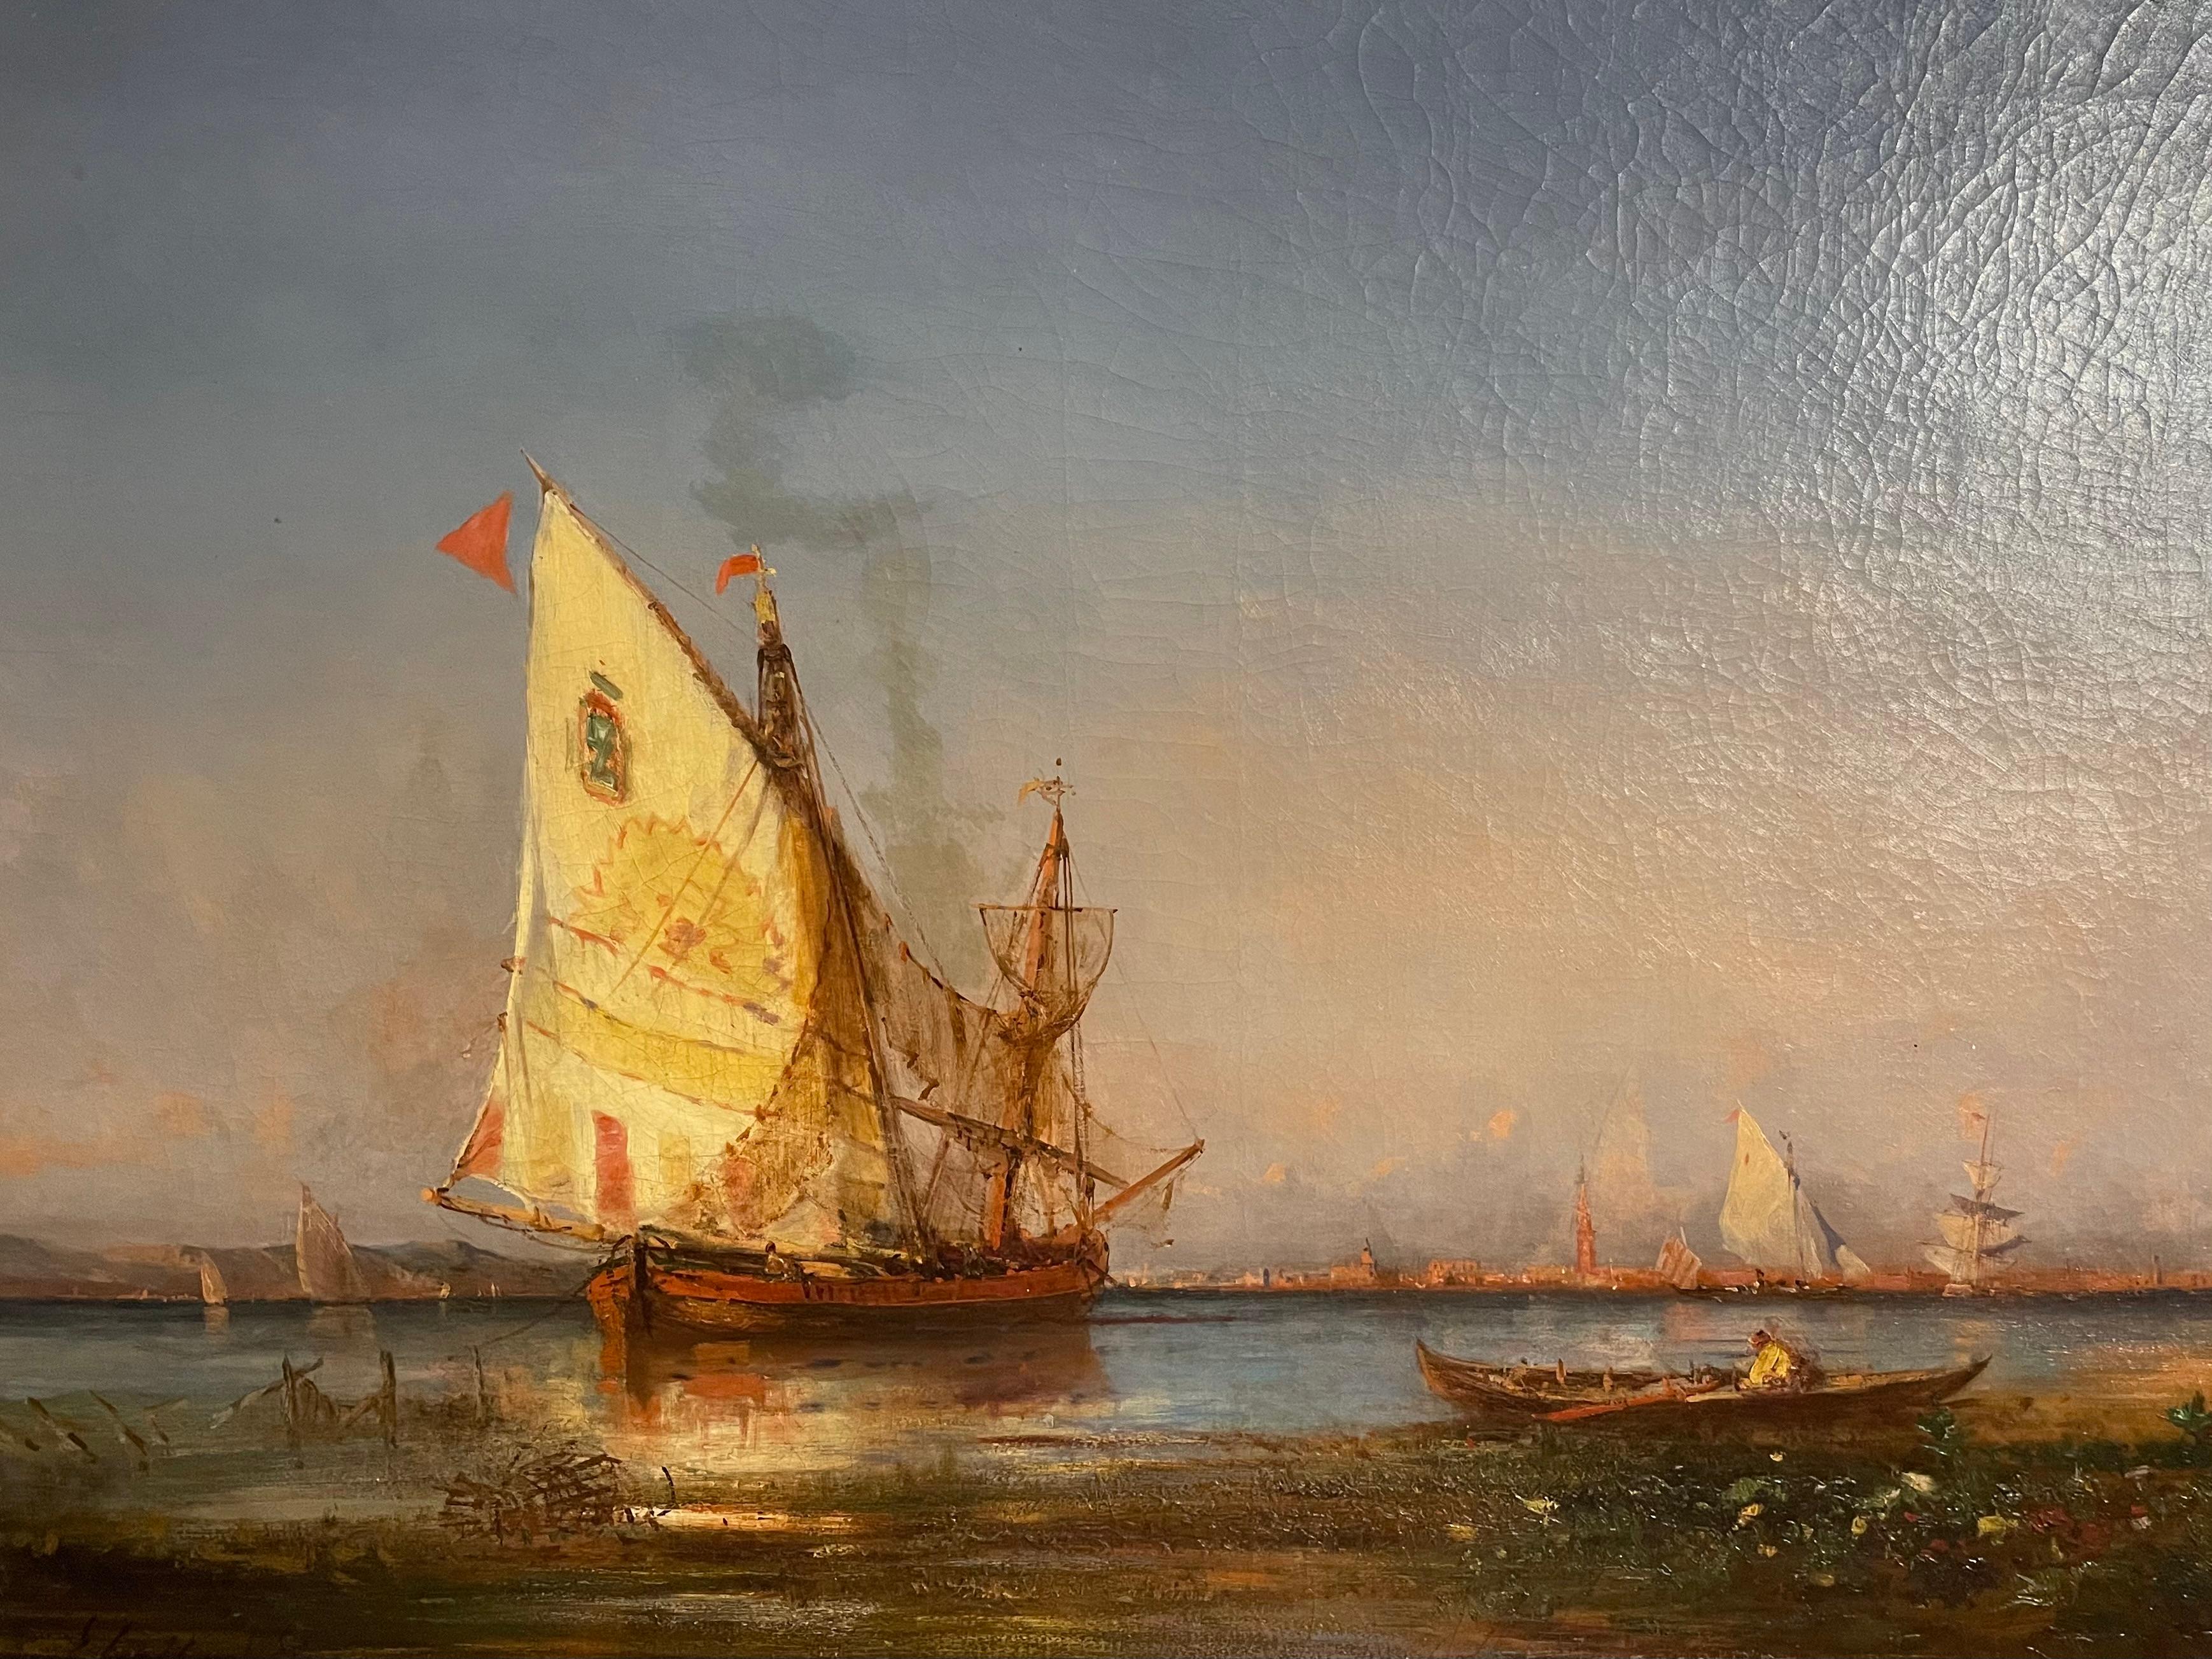 French 19th century oil on canvas painting by Paul Charles Emmanuel Gallard-Lepinay (1842-1885), is of ships on the Venetian coast.  Gallard-Lepinay is renowned for his maritime work, most notably Venice but also the French coast of Marseilles and